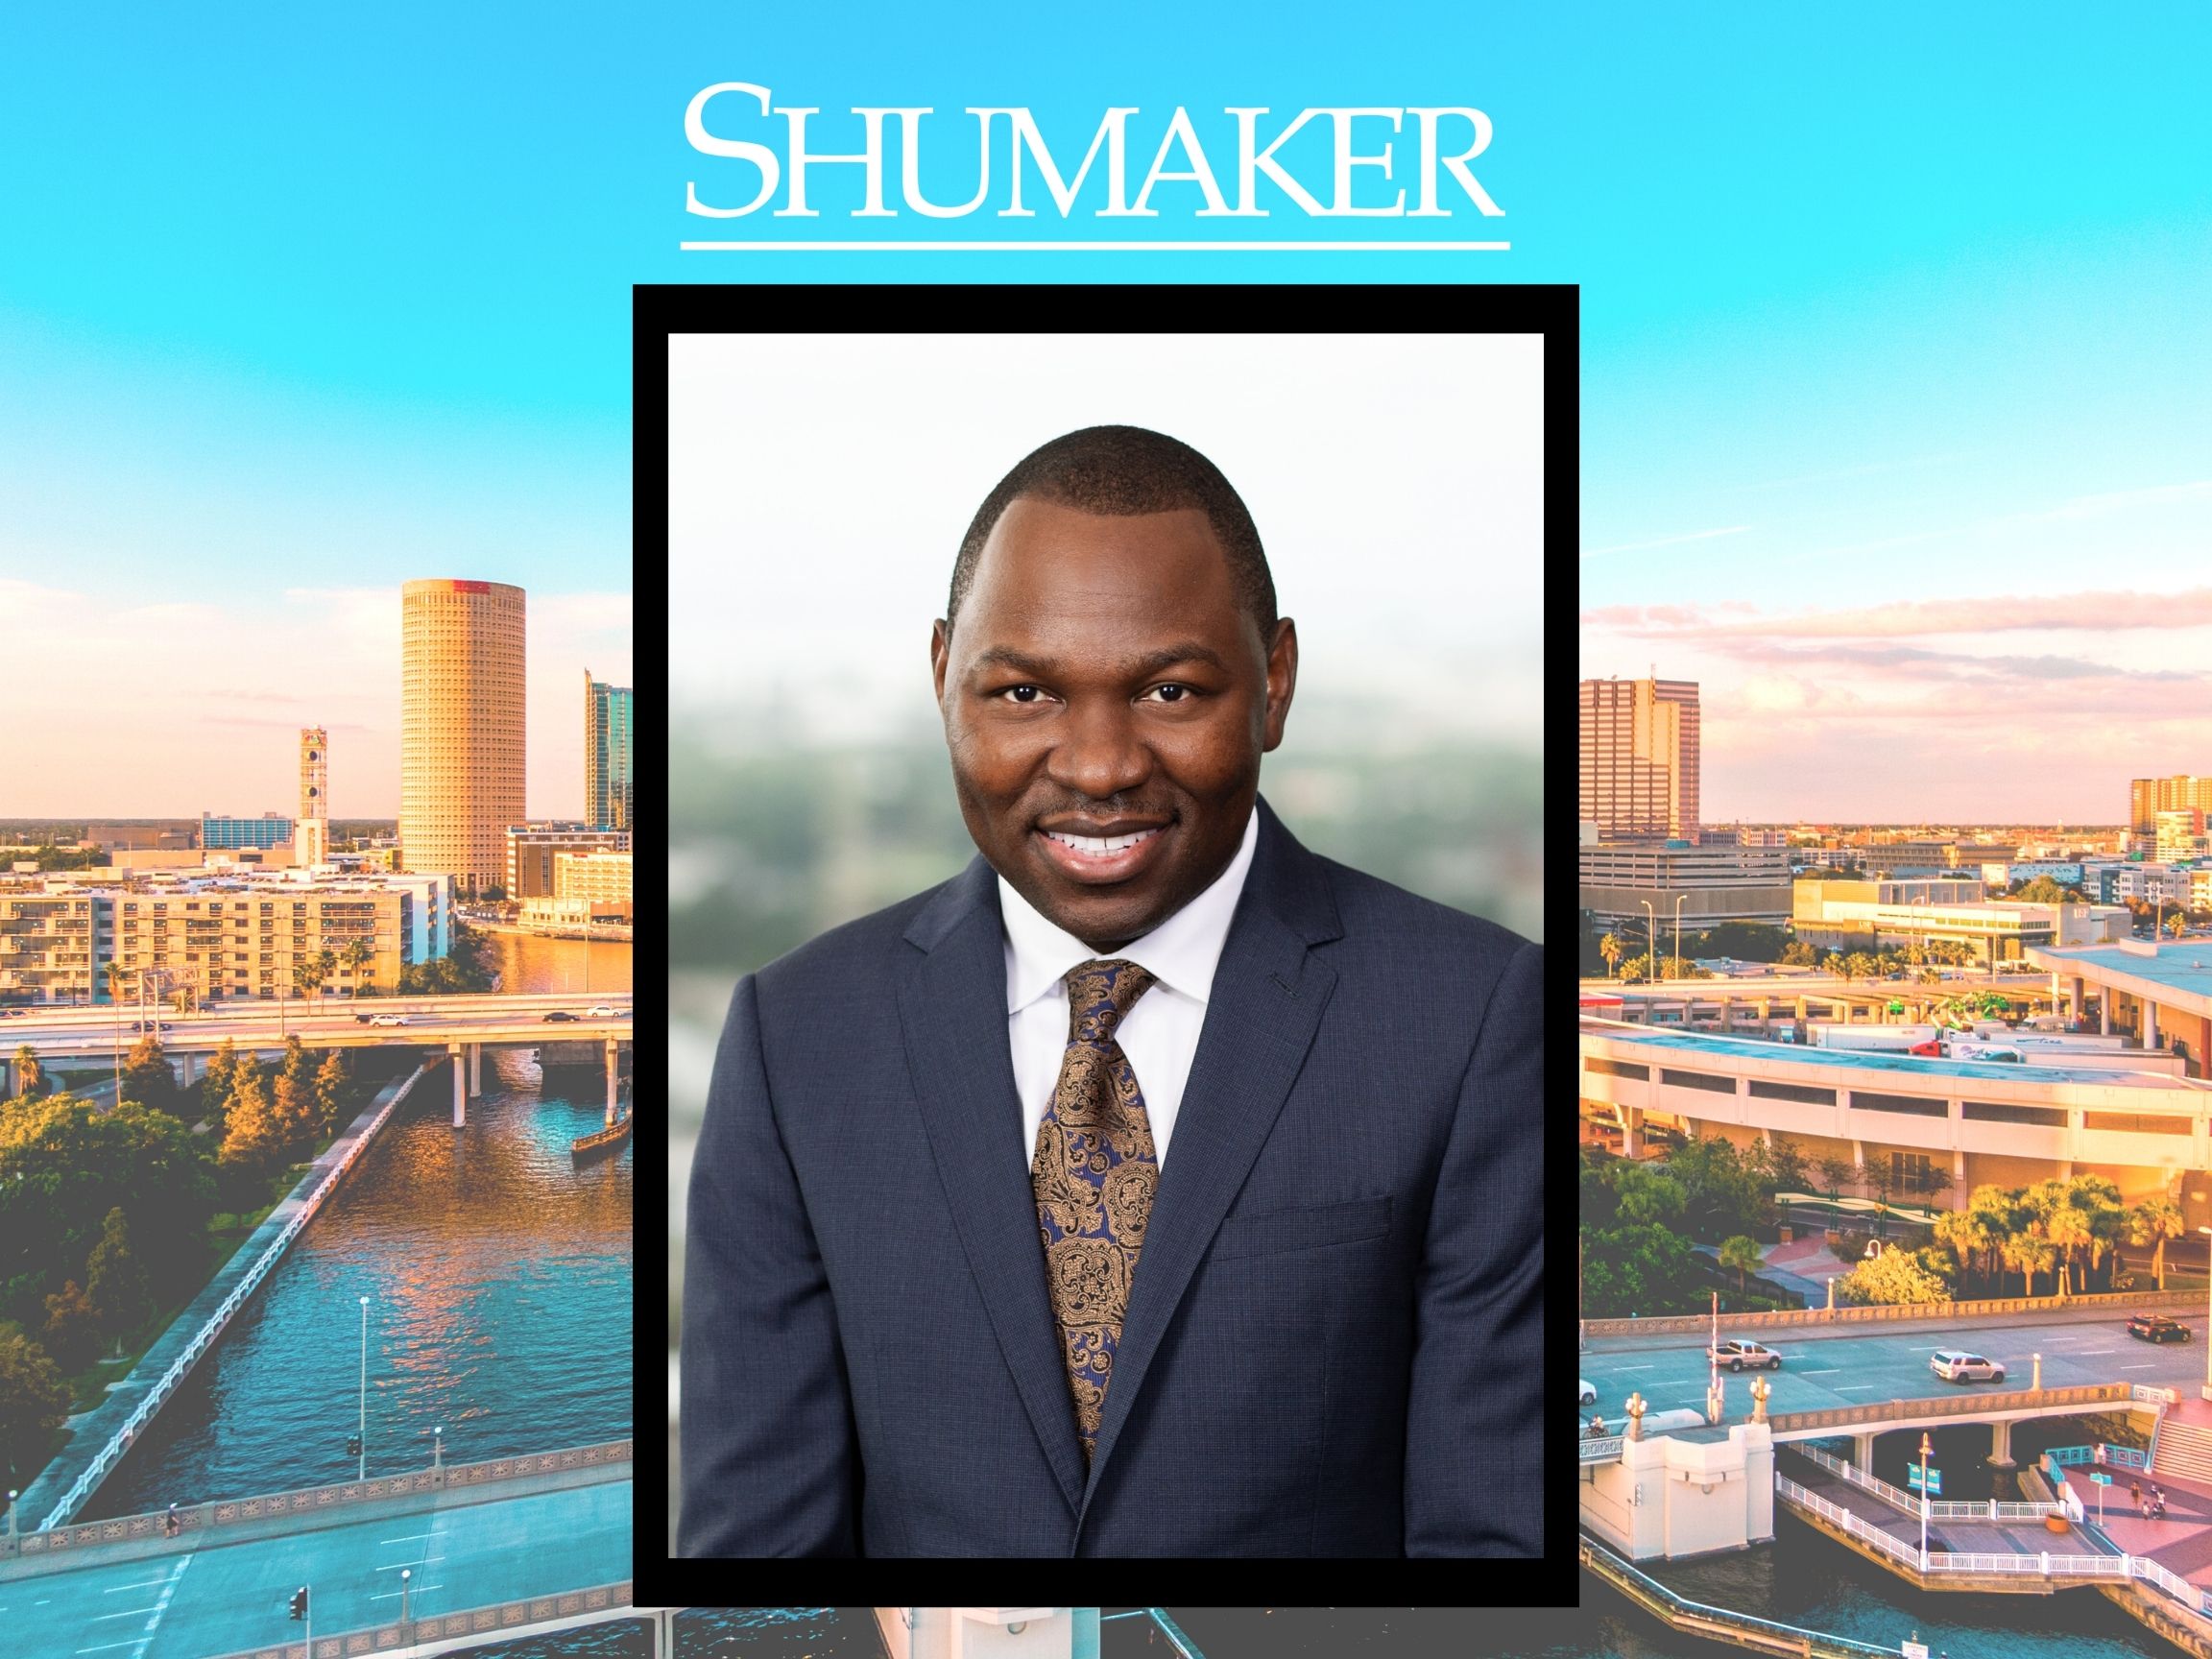 Junior Ambeau Elected to the Gulfcoast Legal Services, Inc. Board of Directors